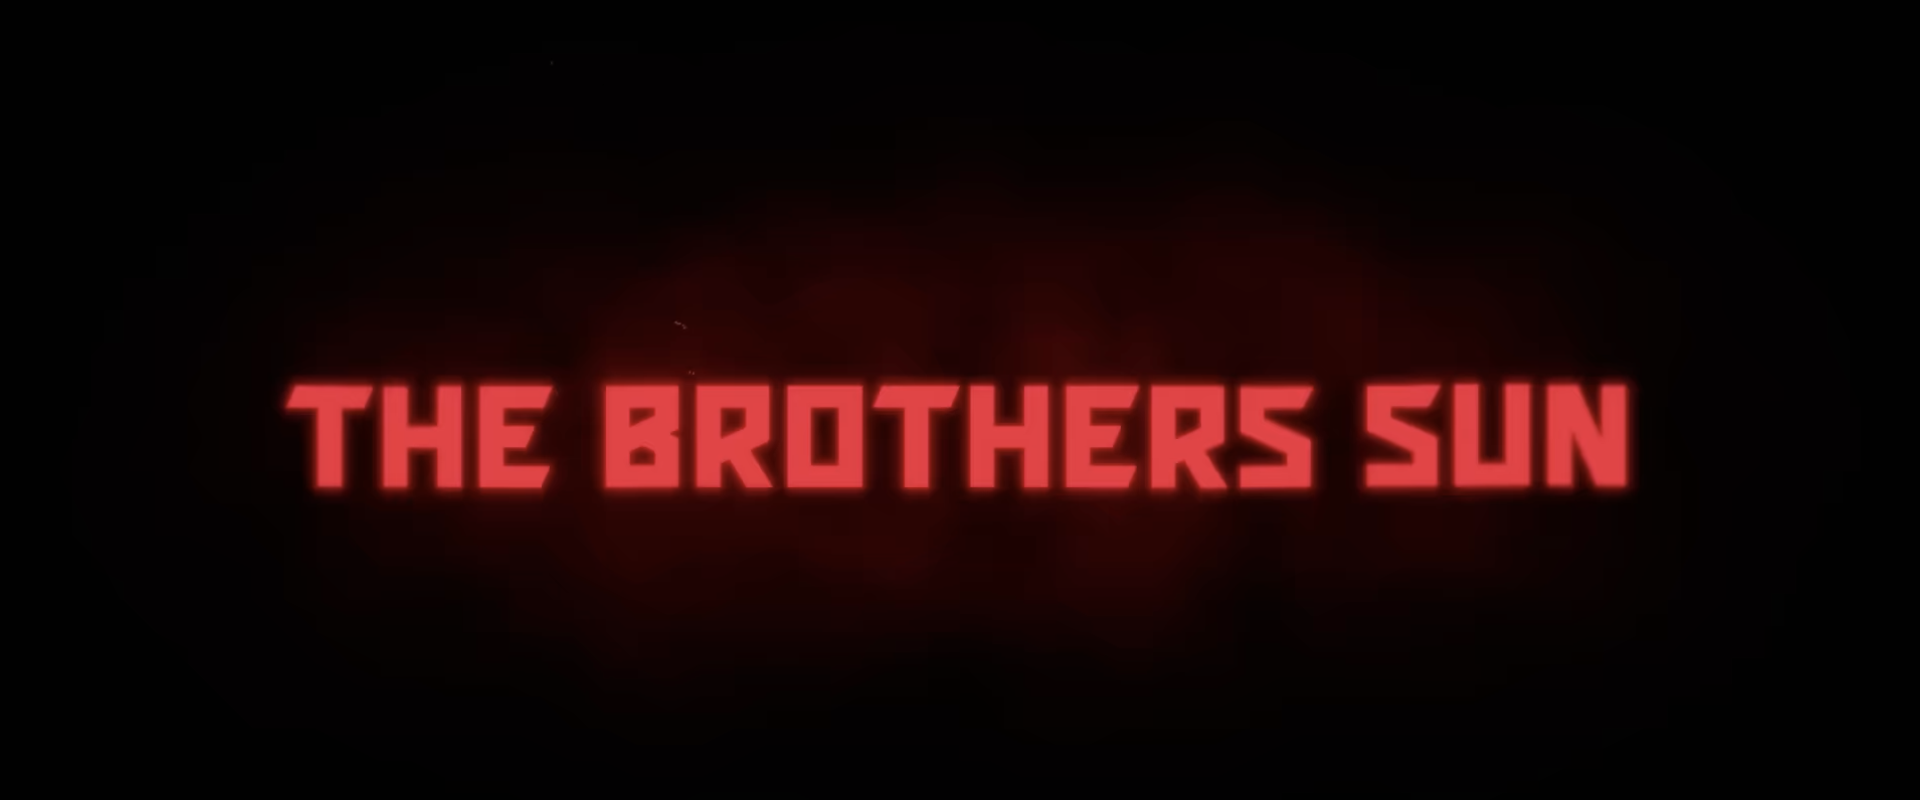 Michelle Yeoh Returns To Action In Netflix THE BROTHERS SUN